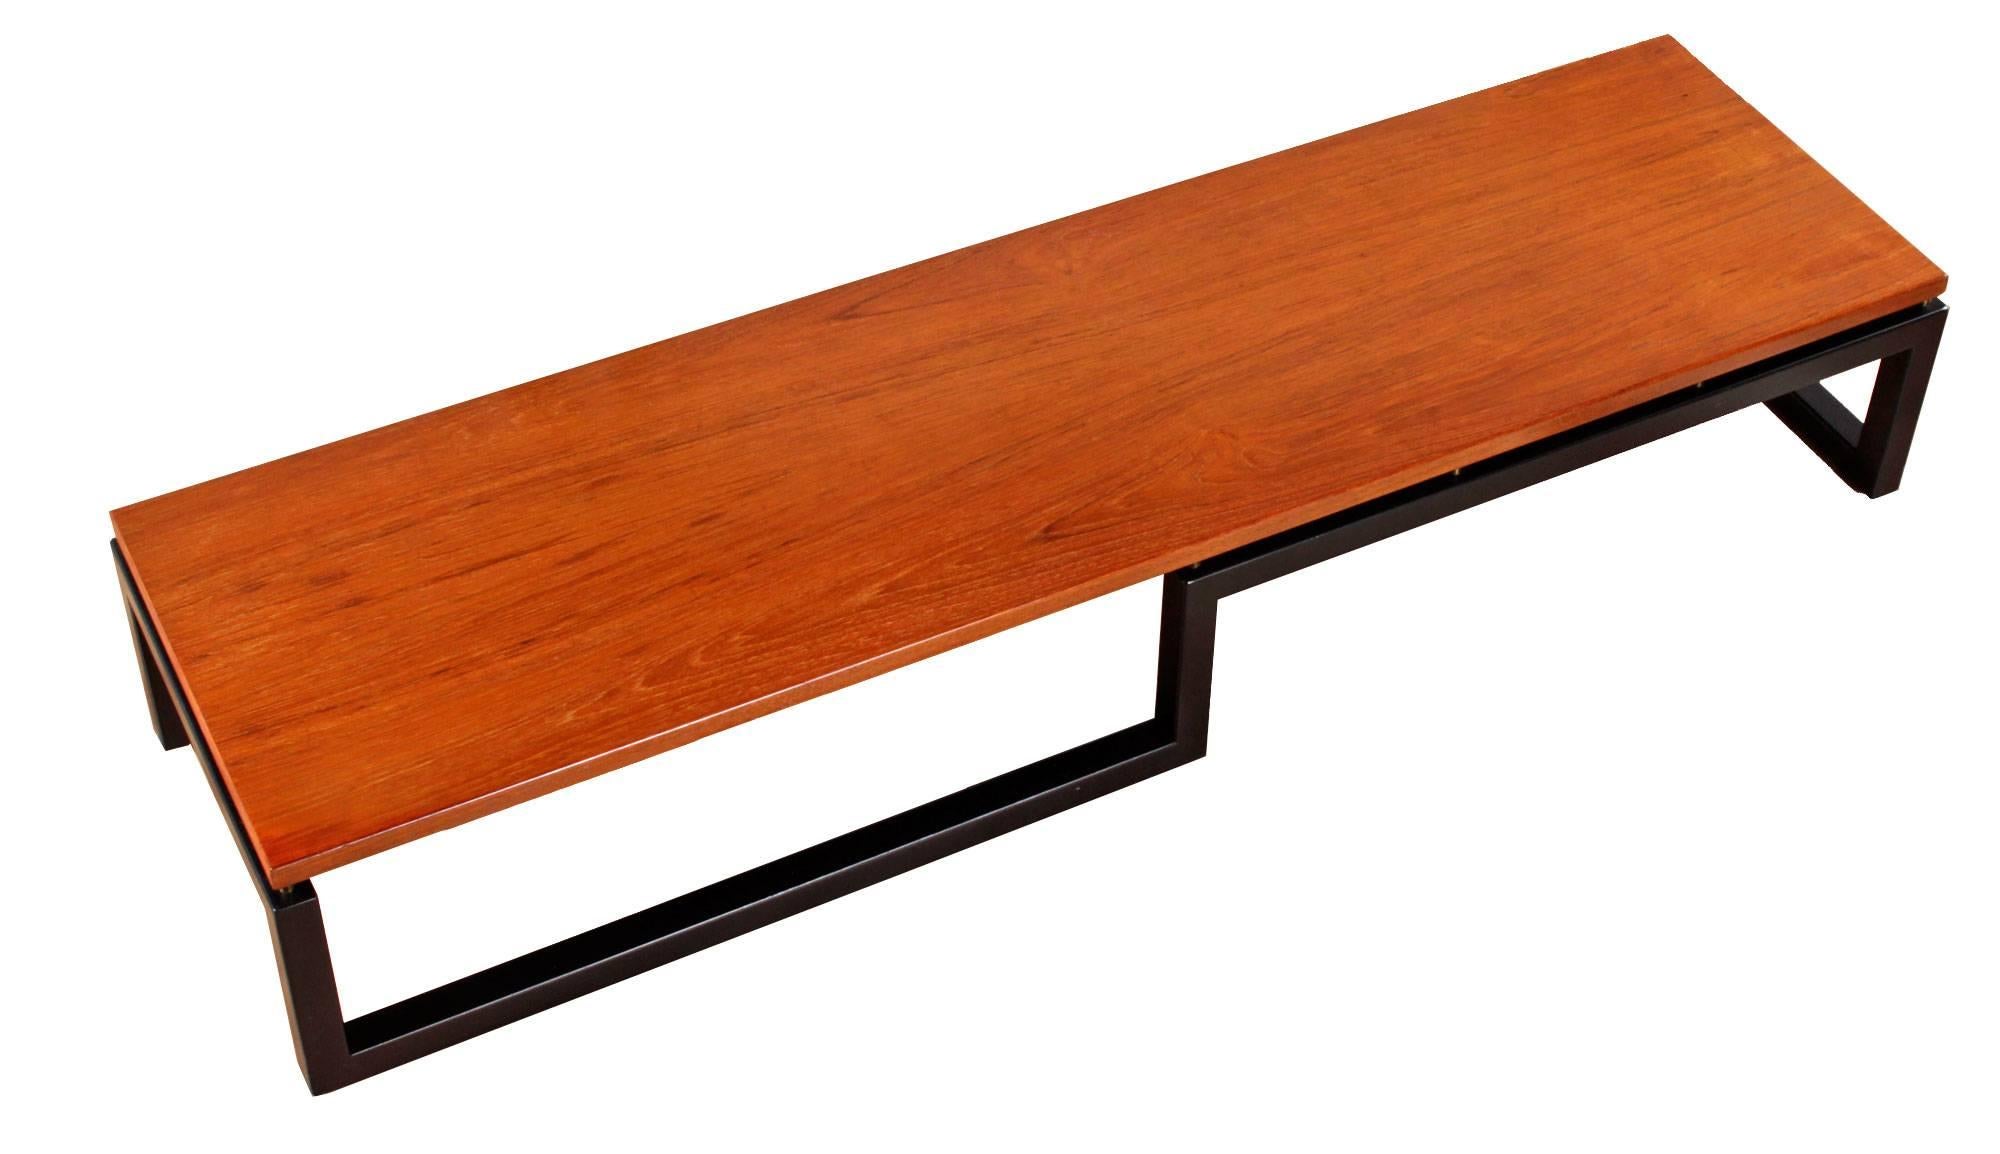 Asian inspired bench by Michael Taylor for Baker. Vintage 1950s, this piece has been professionally restored. Be the first to enjoy this reinvigorated Mid-Century Modern treasure. The versatile unit was originally designed to be a bench but can also